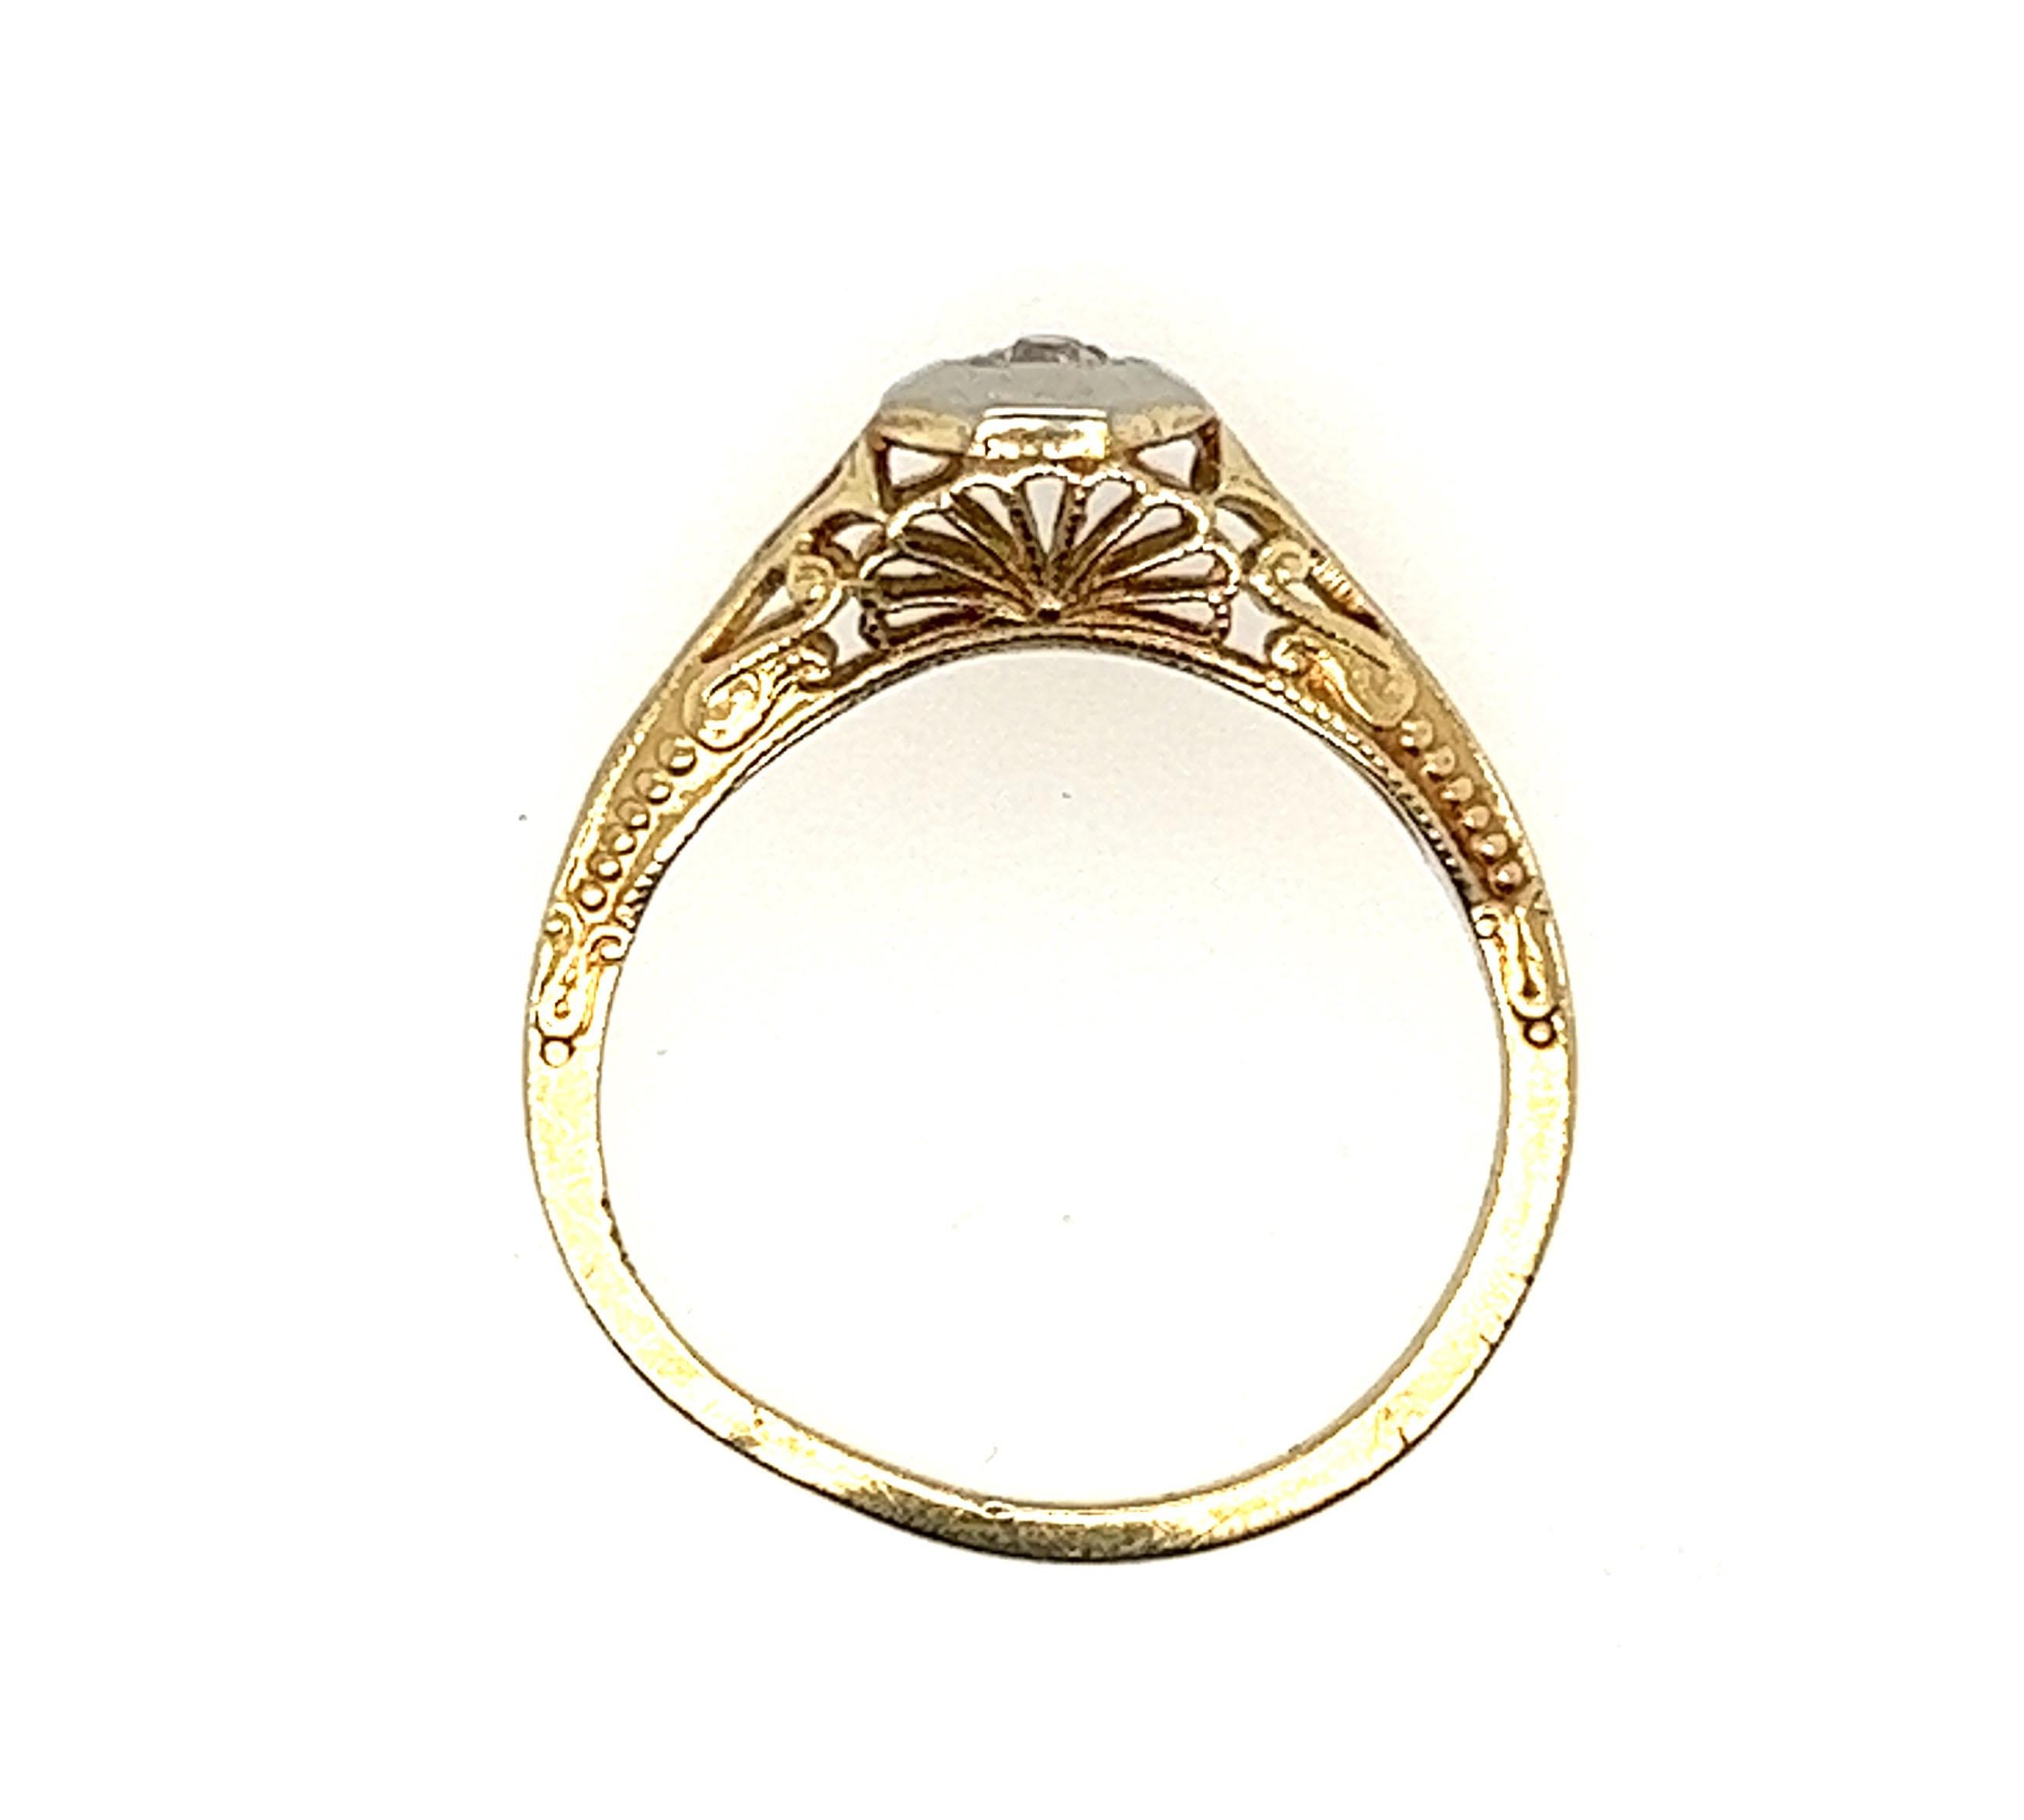 Genuine Original Antique from 1920's Diamond Solitaire Engagement Ring .05ct Old Mine Cut 14K 


Featuring a Gorgeous Genuine .05ct Natural Old Mine Cut Diamond Center

Very Rare Yellow Gold Art Deco Ring With a White Gold Top

Hand Engraved